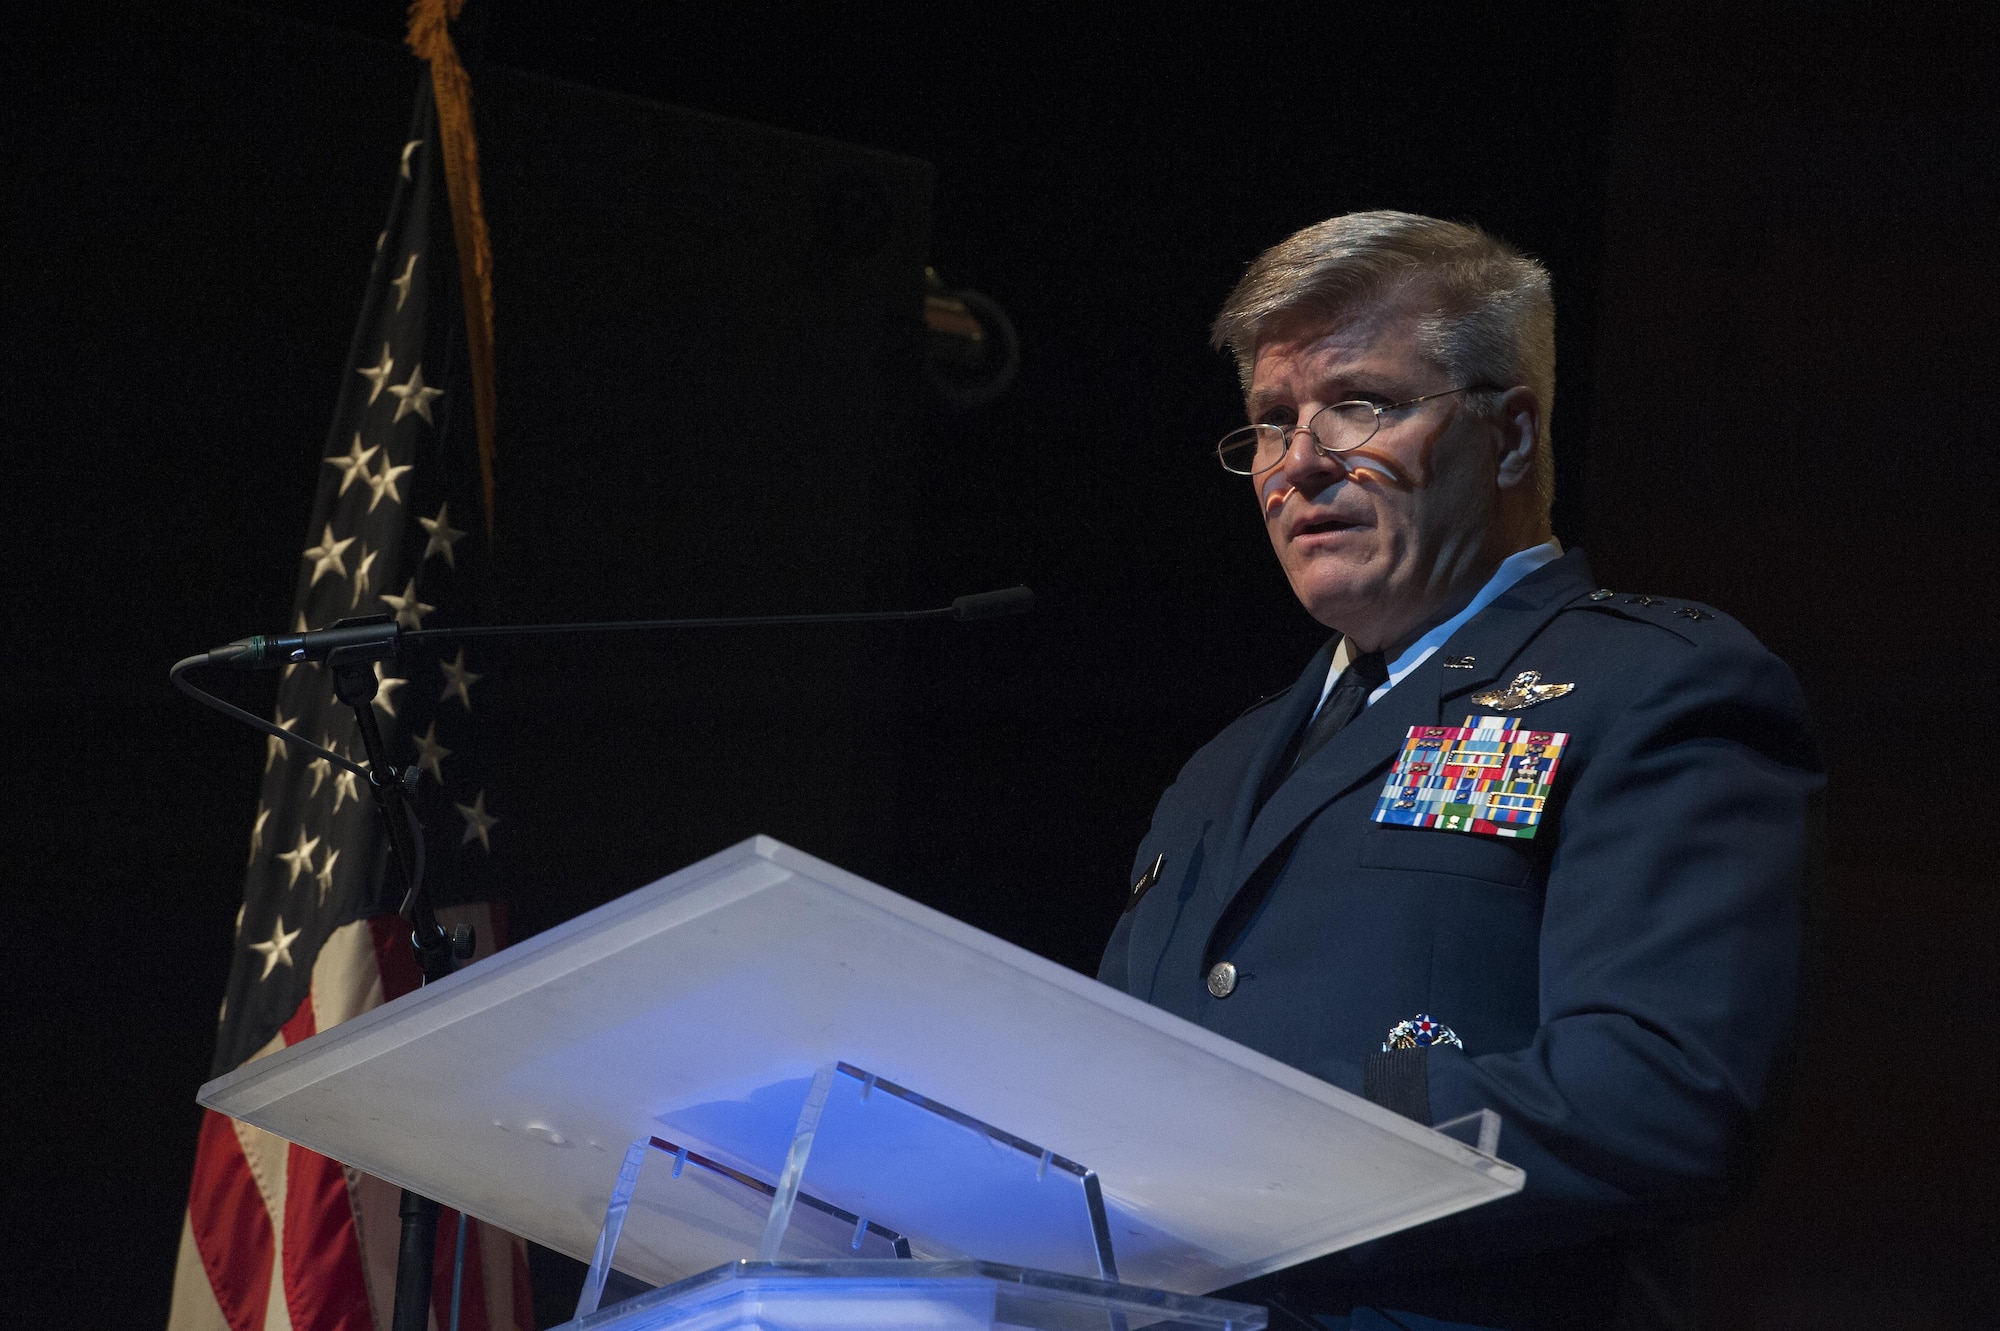 Maj. Gen. Jerry Harris, vice commander, Air Combat Command, Joint Base Langley-Eustis, Va., speaks during a U.S. Air Force Heritage of America Band 75th Anniversary Band Concert at the Ferguson Center for the Arts in Newport News, Va., Oct. 1, 2016. The USAF HOAB was one of the original Army Air Corps bands, created by order of the Secretary of War on October 1, 1941 and assigned to Barksdale Field, Louisiana. In June 1946, after being assigned to Brooks Field, Texas, the band arrived at Joint Base Langley-Eustis, Virginia, its current home. (U.S. Air Force photo by Staff Sgt. Nick Wilson) 